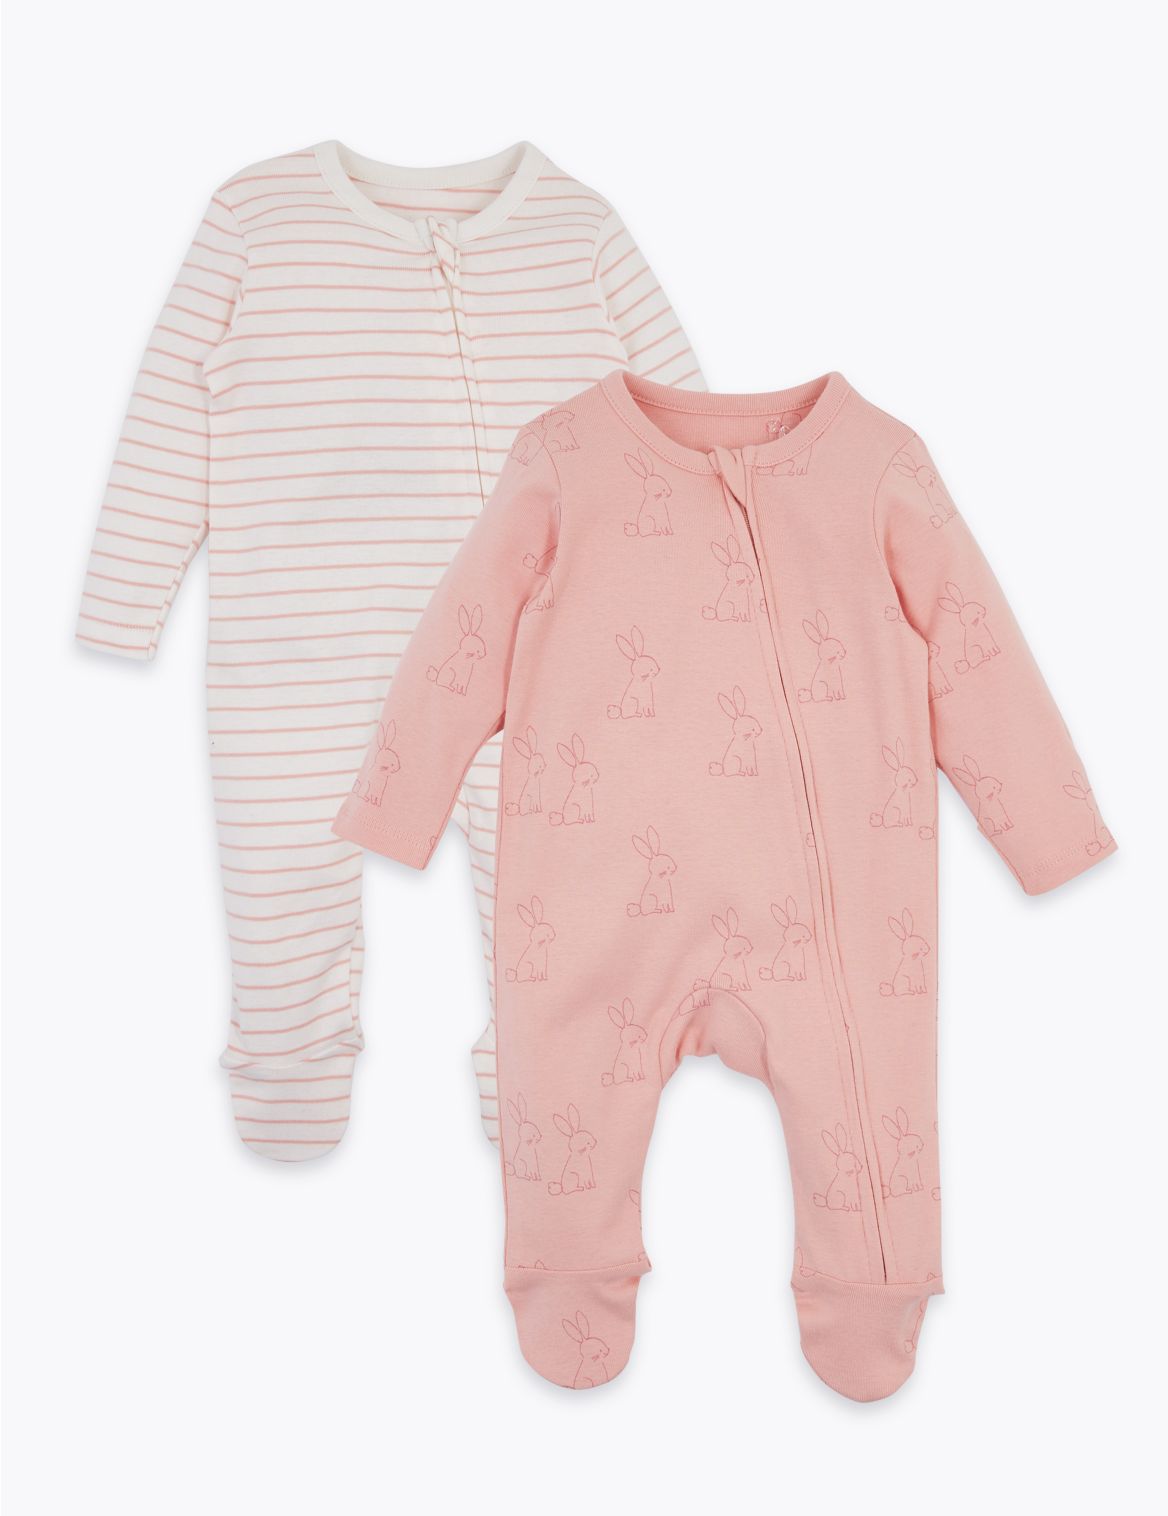 2 Pack Cotton Patterned Sleepsuits (7lbs-12 Mths) pink